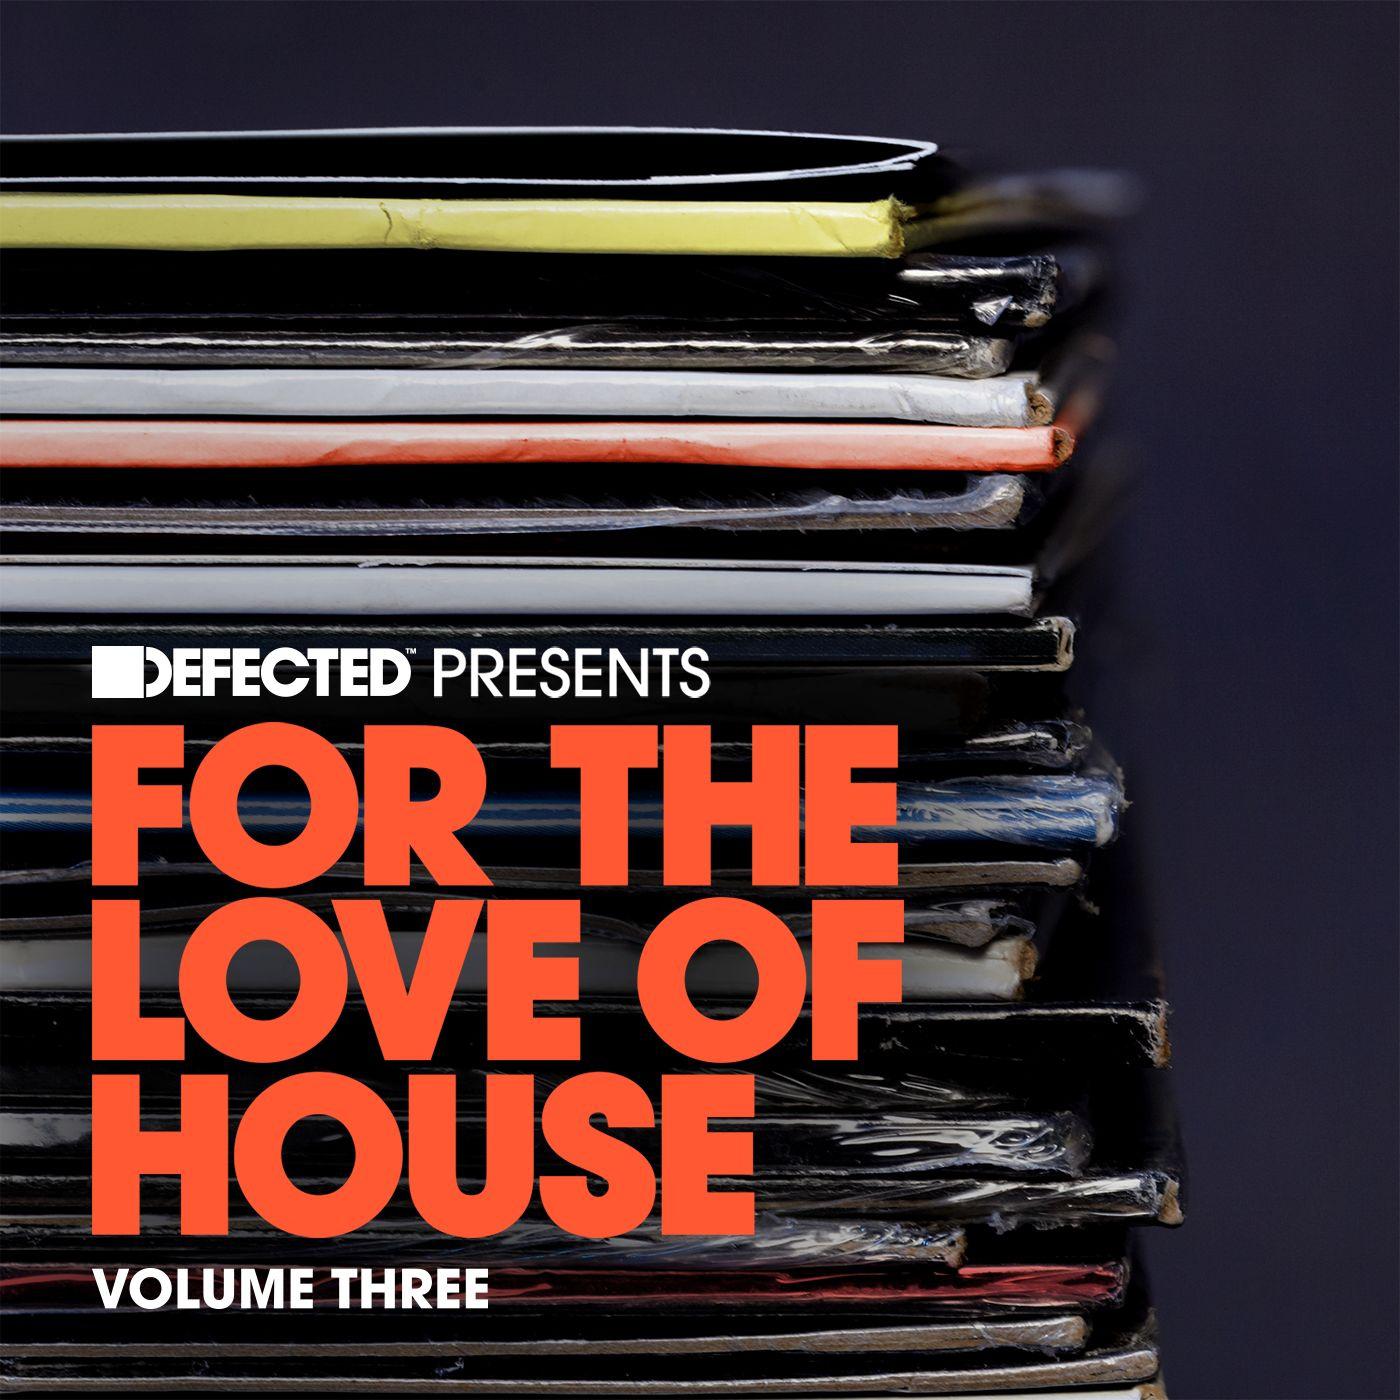 Juan Corbi - Defected presents For The Love Of House Volume 3 Mix 2